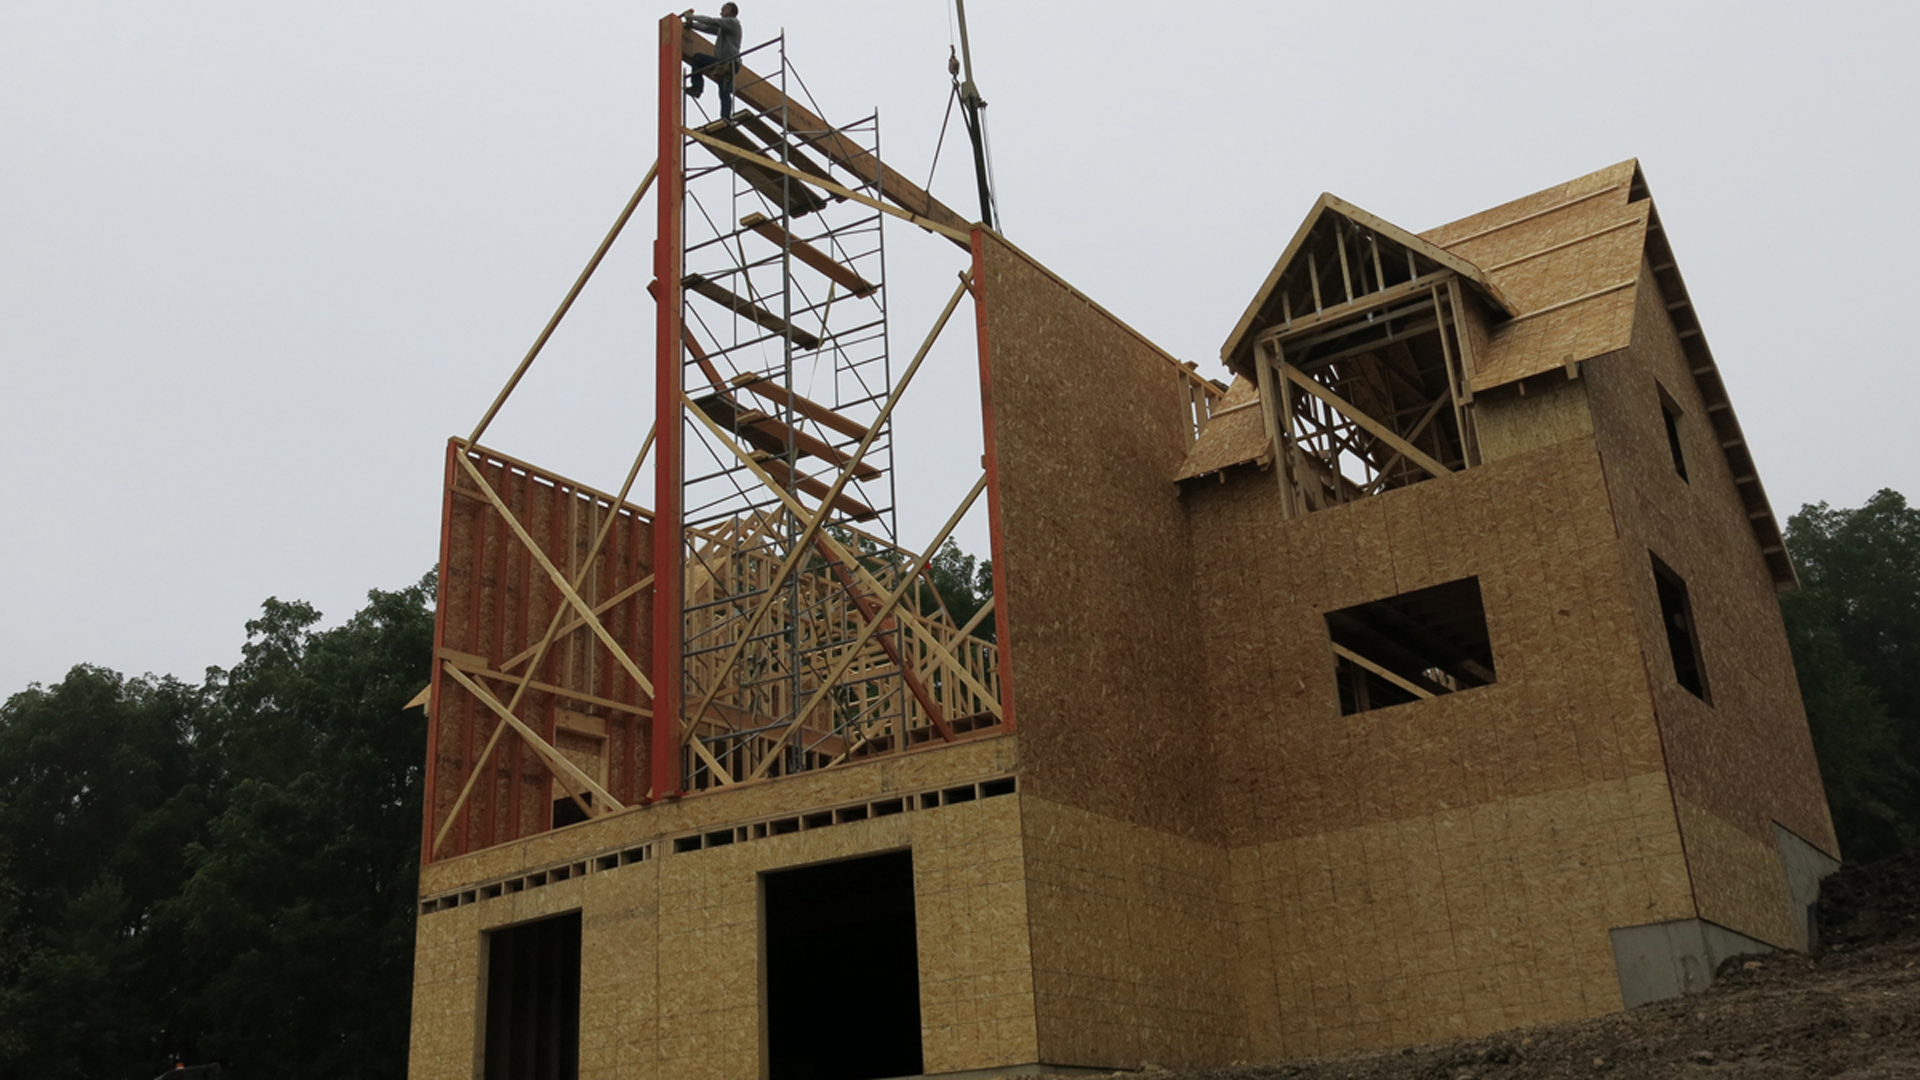 Mineral Point Residential & Commercial Construction